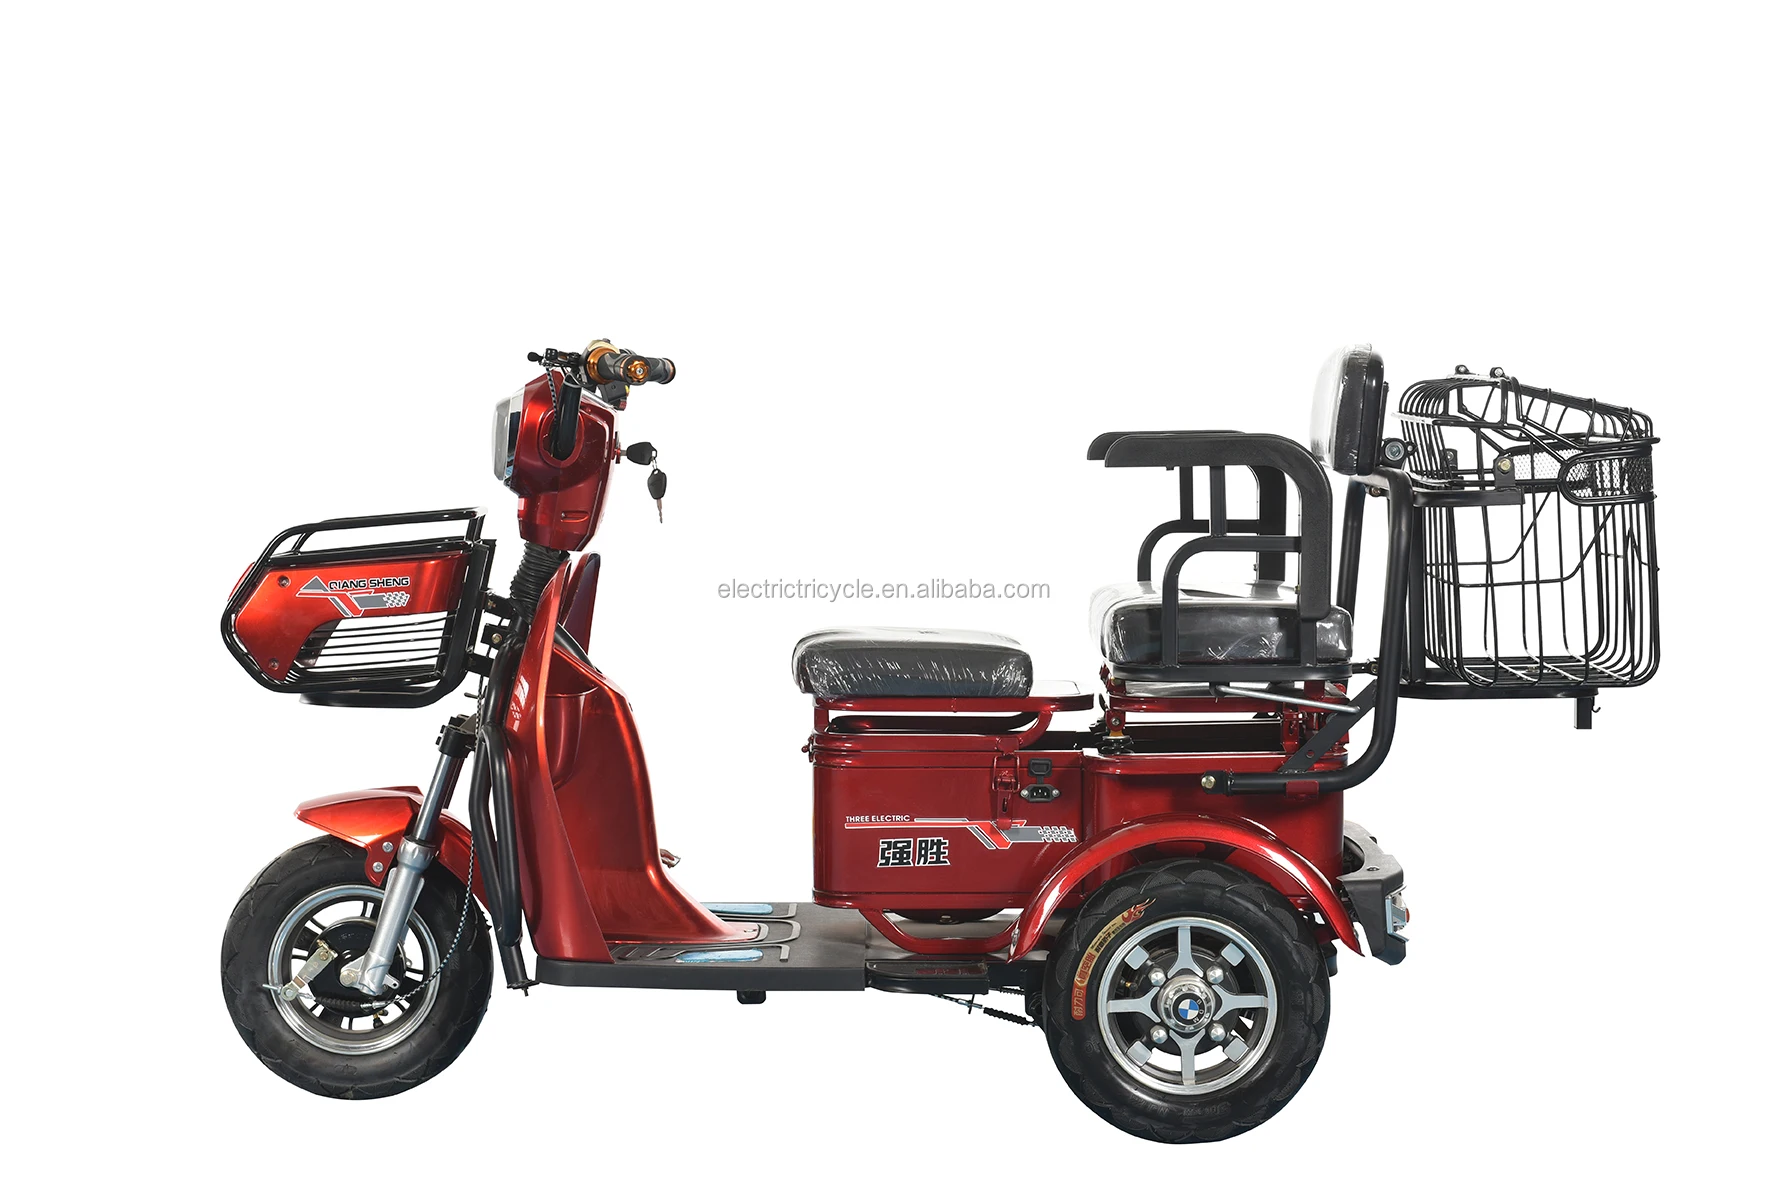 Disabled 3 Wheel Scooter Three Wheel Motorcycle Taxi For Sale In Philippines Buy 3 Wheel Scooter Three Wheel Motorcycle Scooter Taxi Product On Alibaba Com